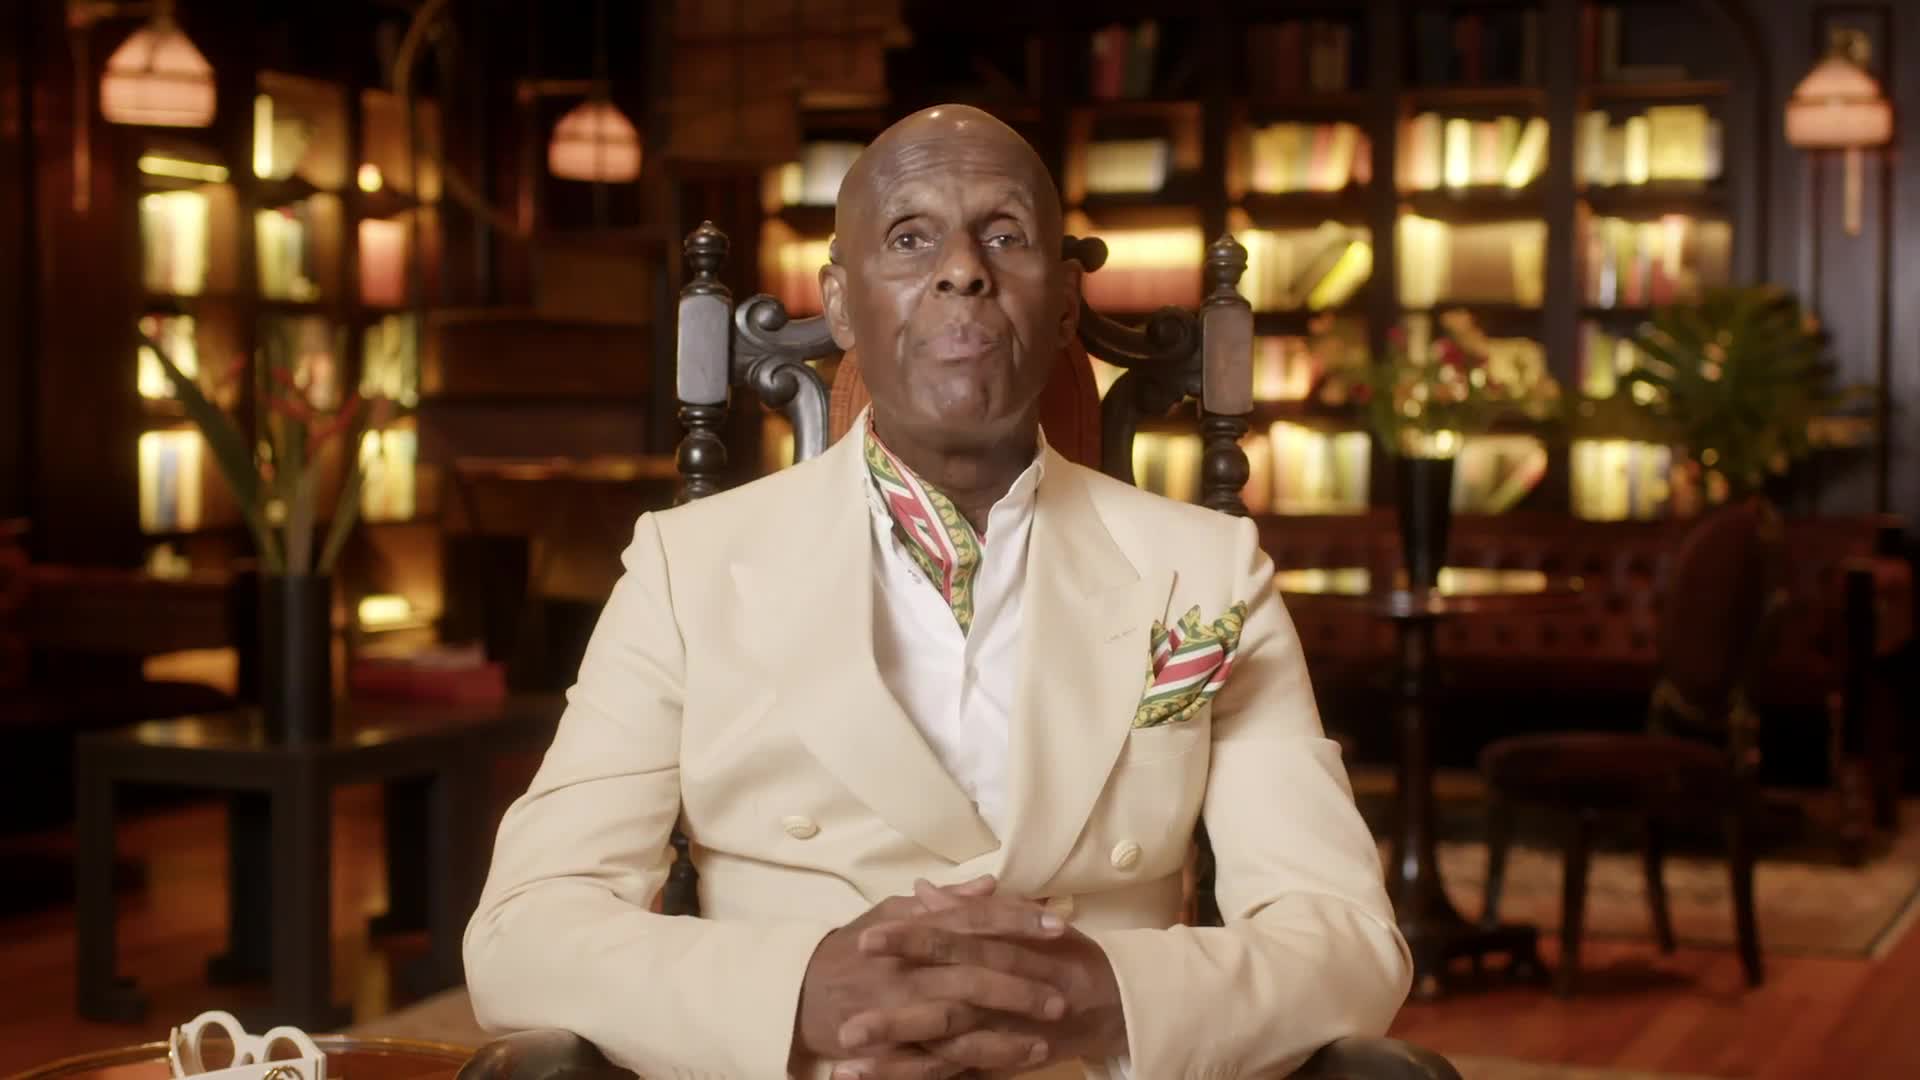 Watch Behind the Moment: Dapper Dan's Ascent from Hustler to Fashion  Innovator, Behind the Moment